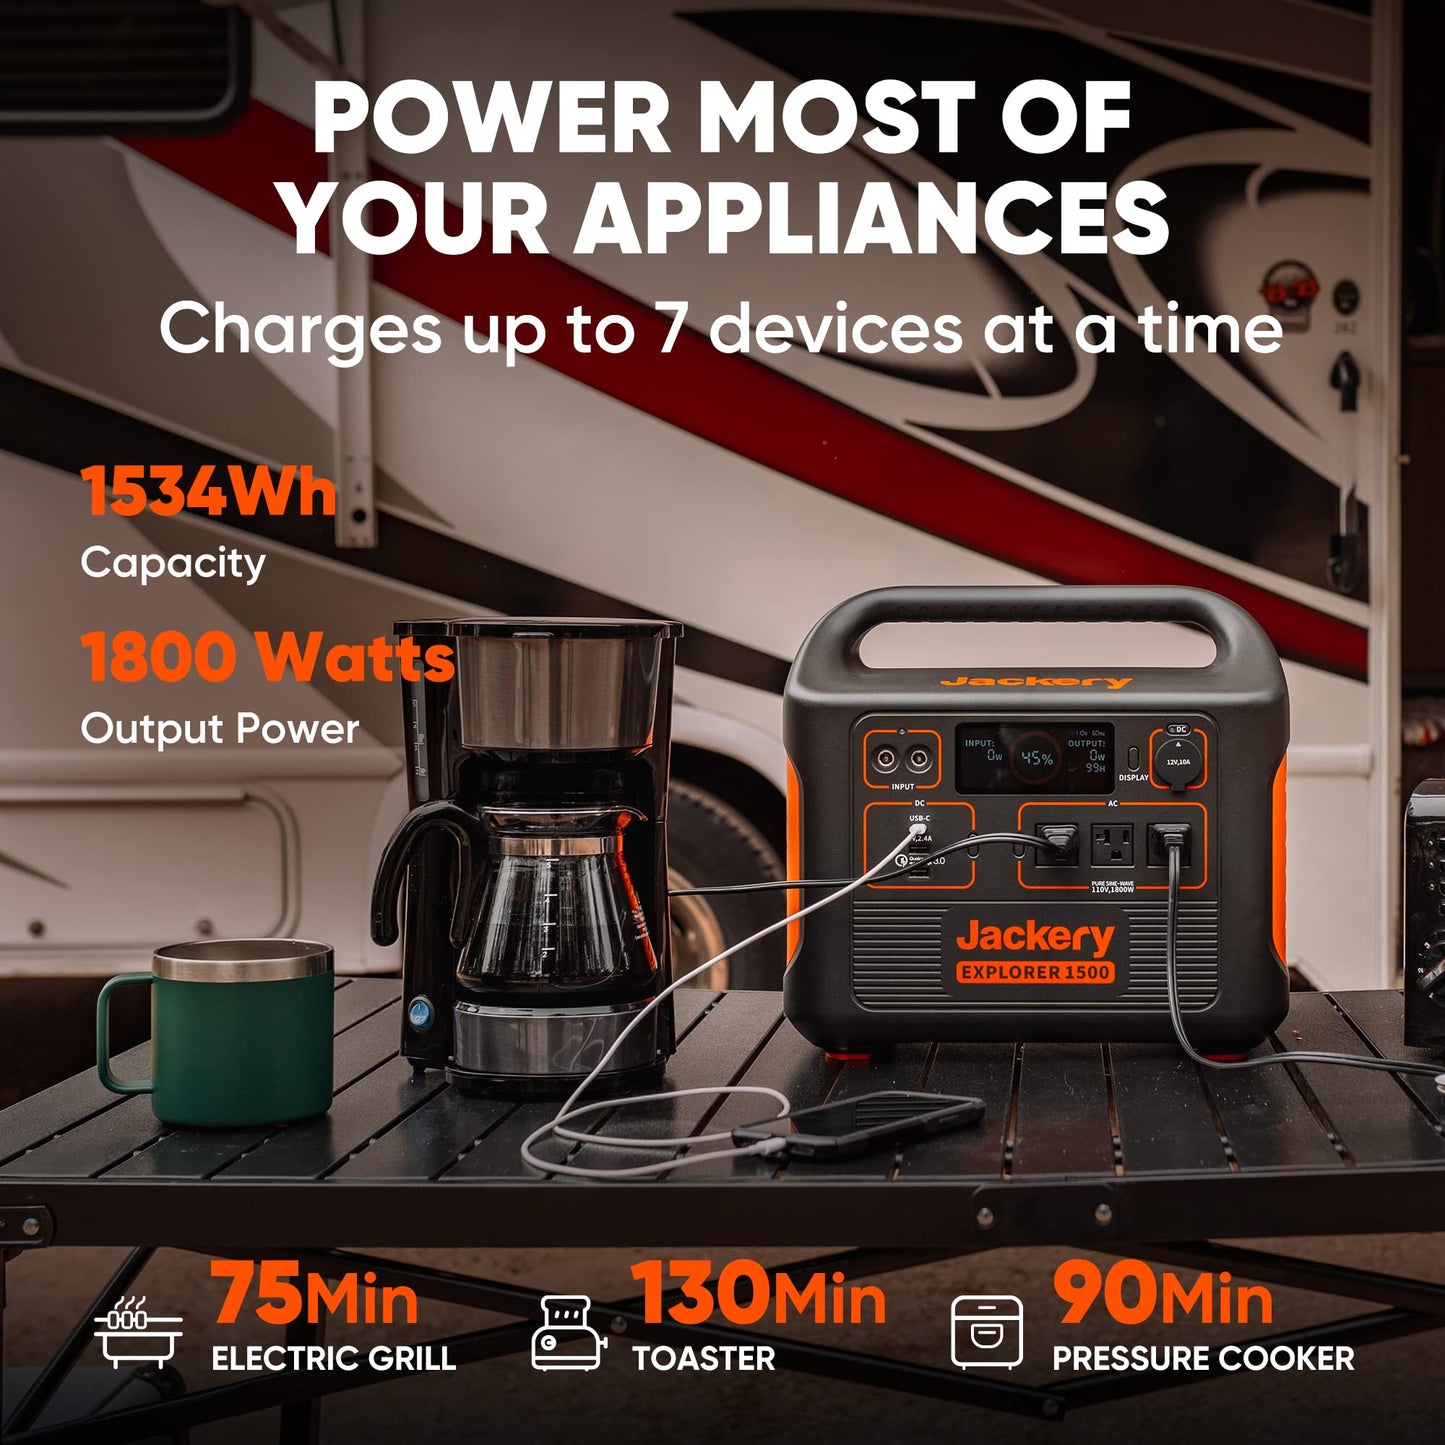 Jackery Portable Power Station Explorer 1500, 1534Wh Portable Generator with 3x110V/1800W AC Outlets, Solar Mobile Lithium Battery Pack for Outdoor RV/Van Camping, Overlanding